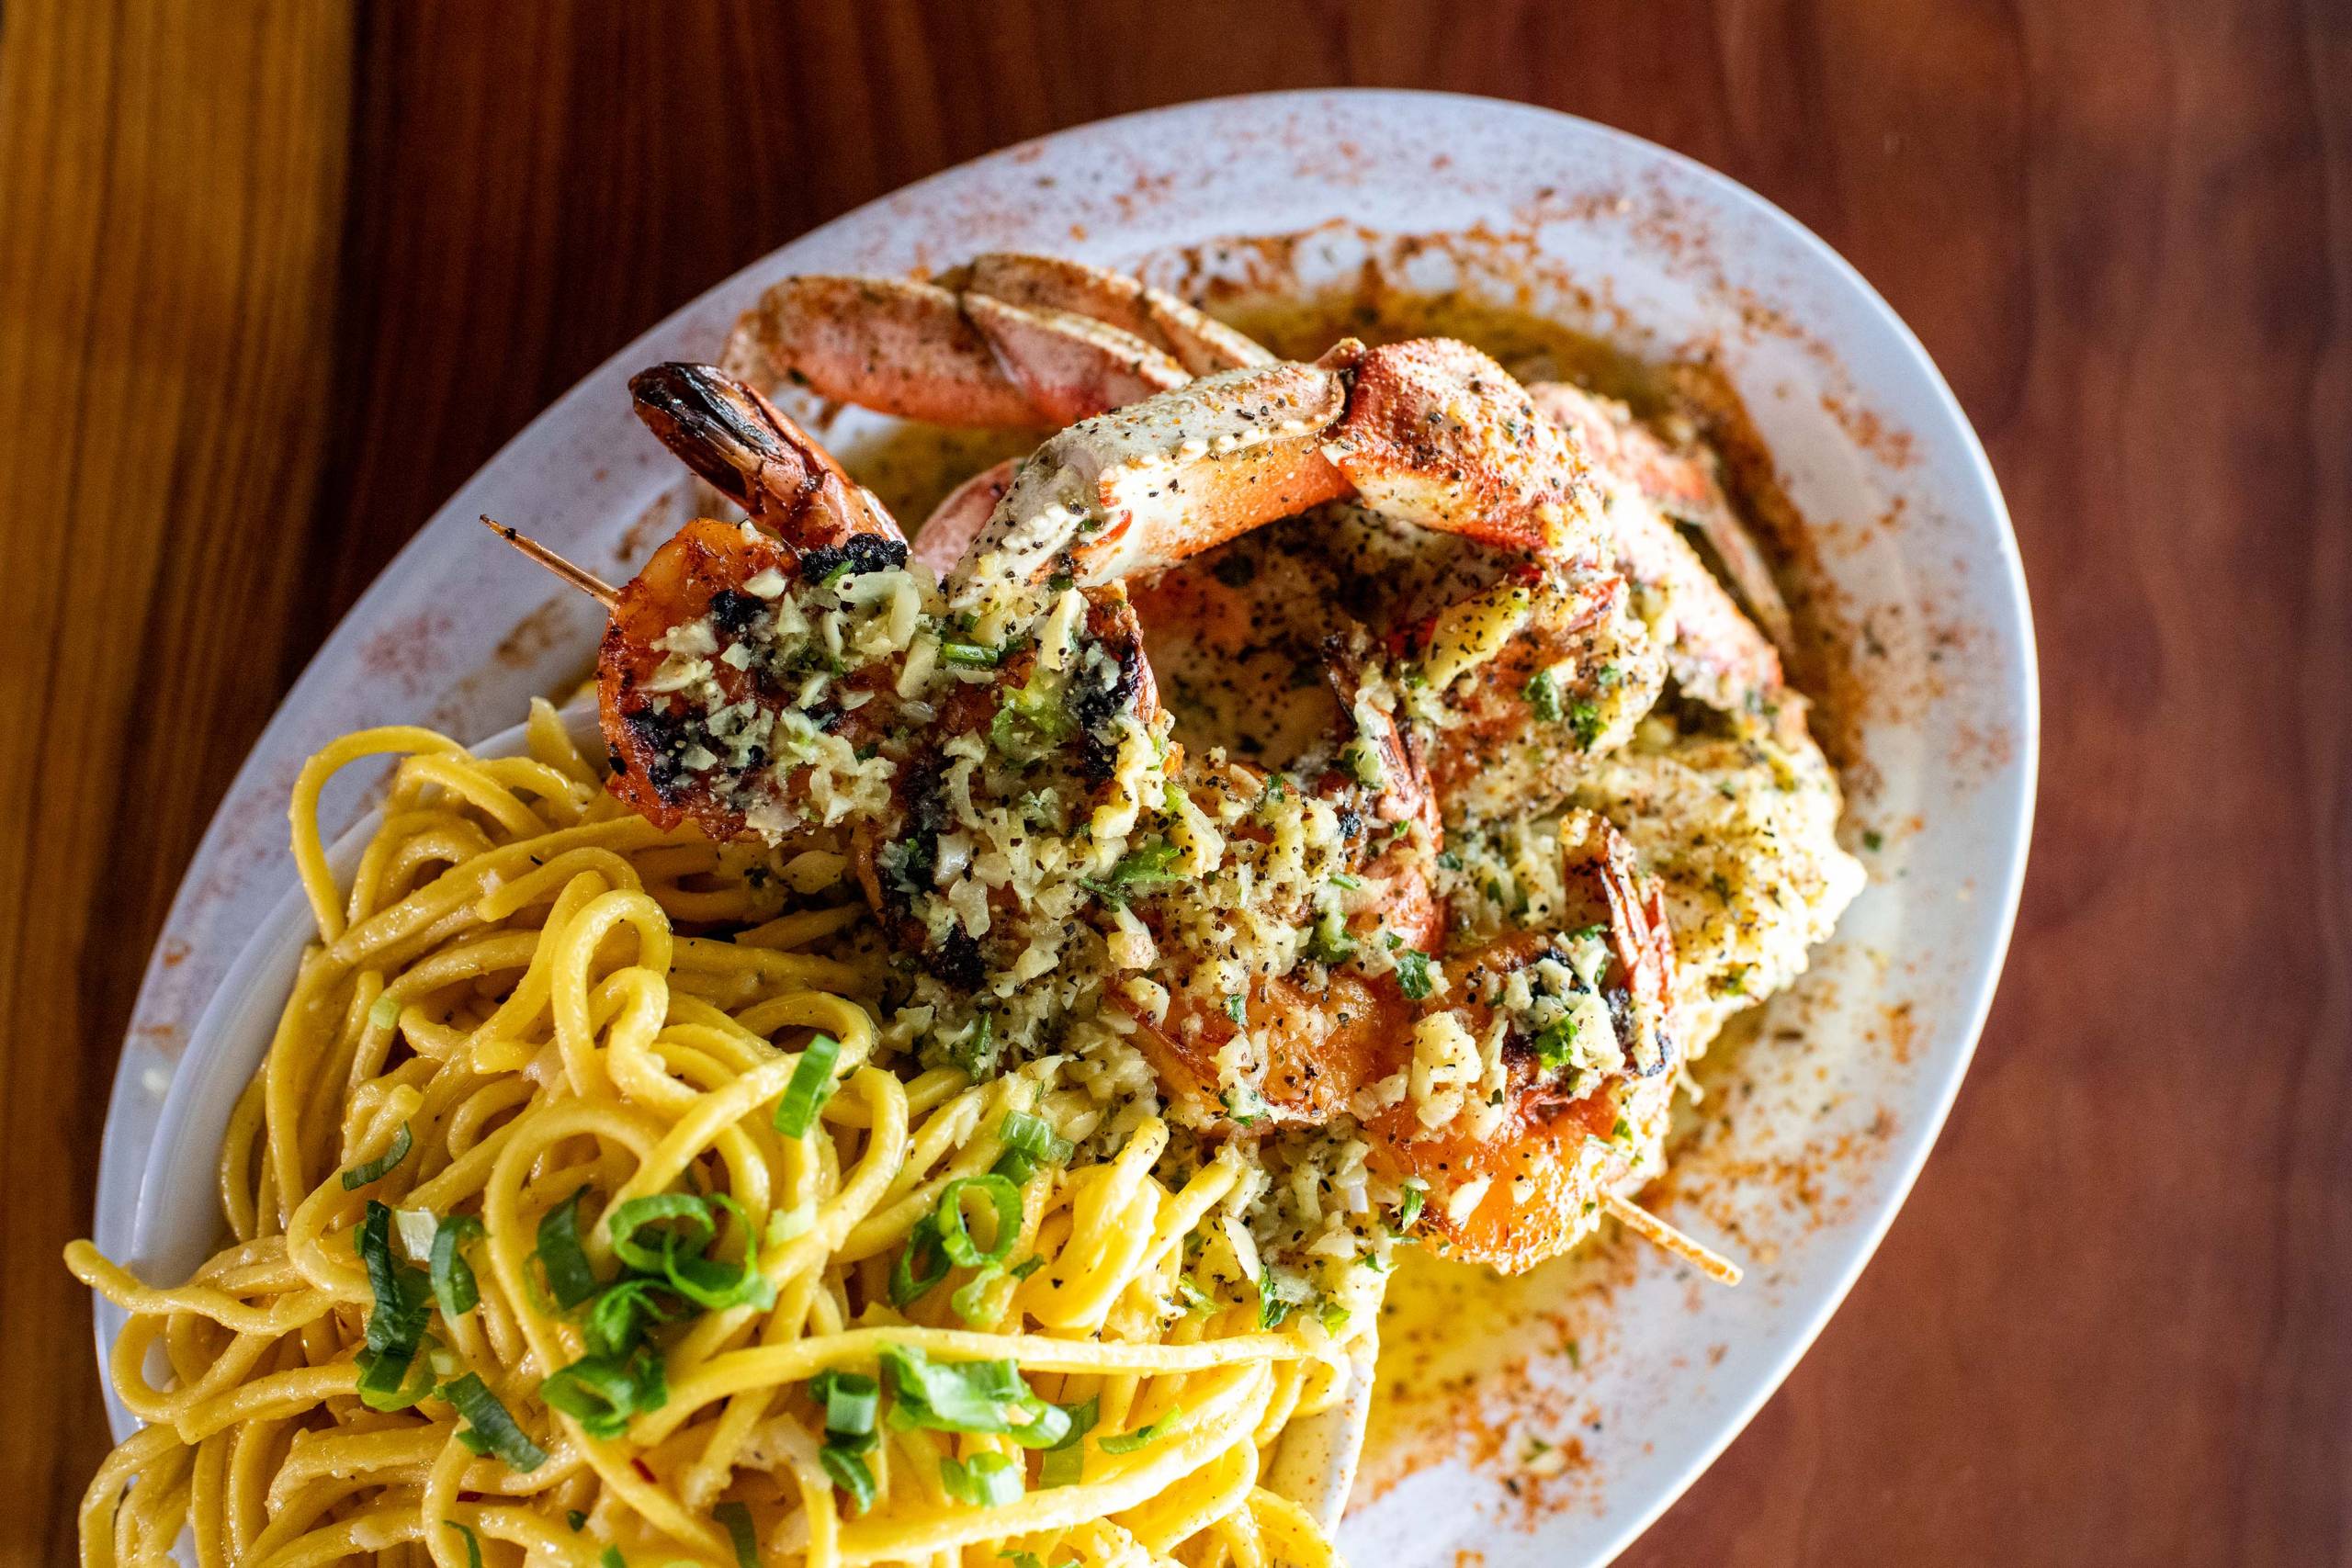 Overhead view of a plate of garlic noodles and roast crab.